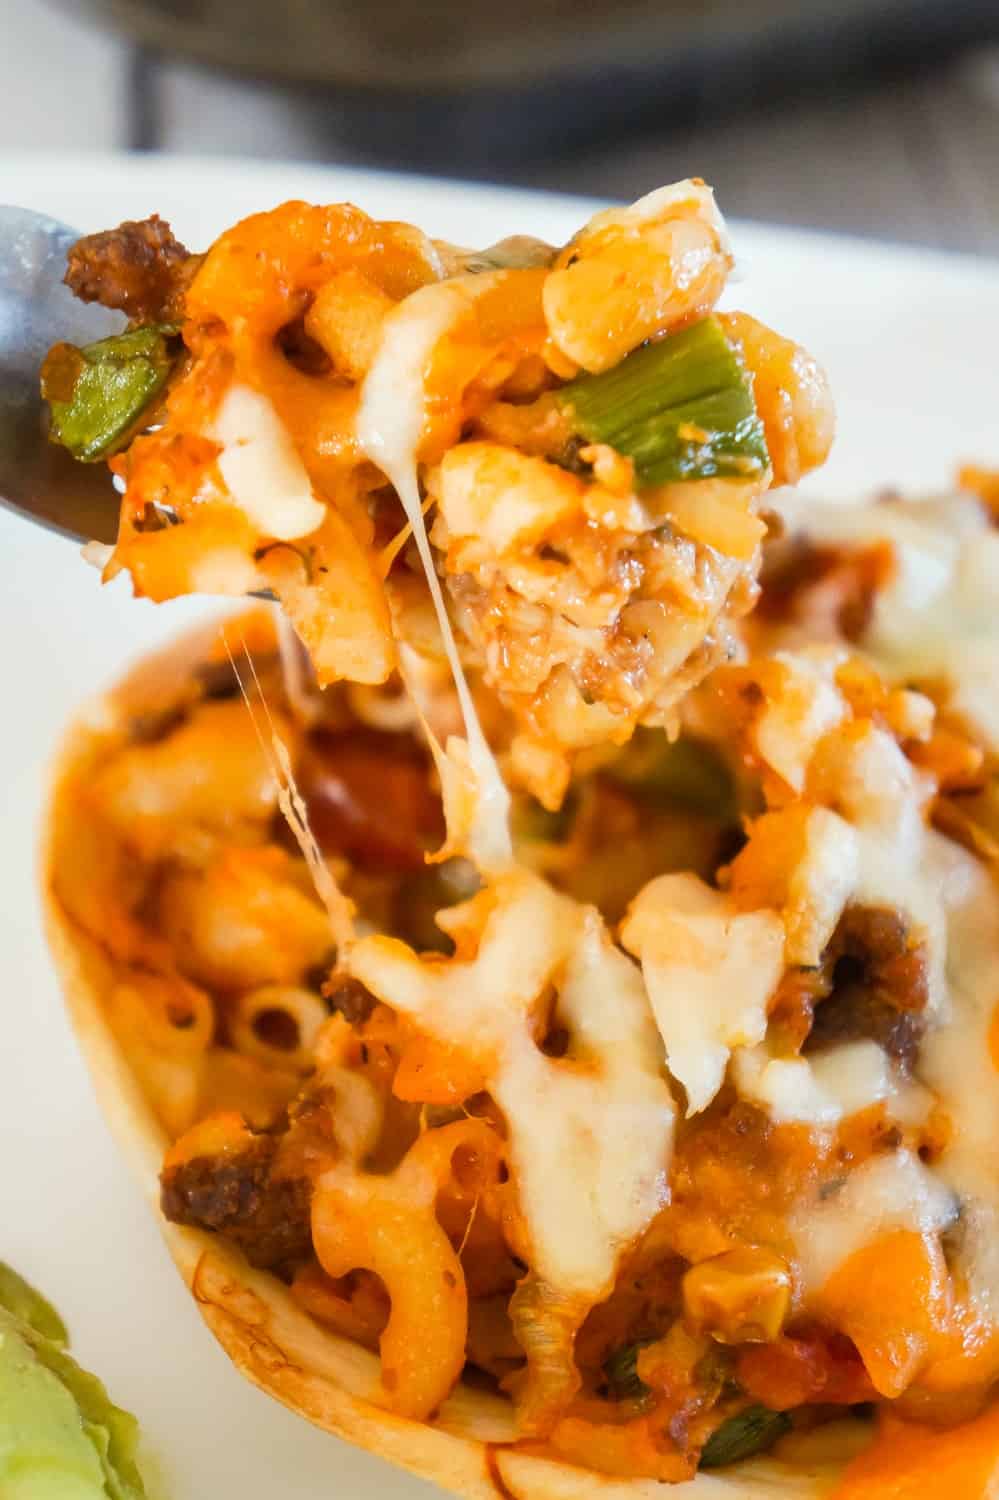 Taco Pasta is an easy ground beef dinner recipe that is fun and kid friendly. This cheesy macaroni tossed in salsa and taco sauce is baked in Old El Paso Tortilla Bowls.